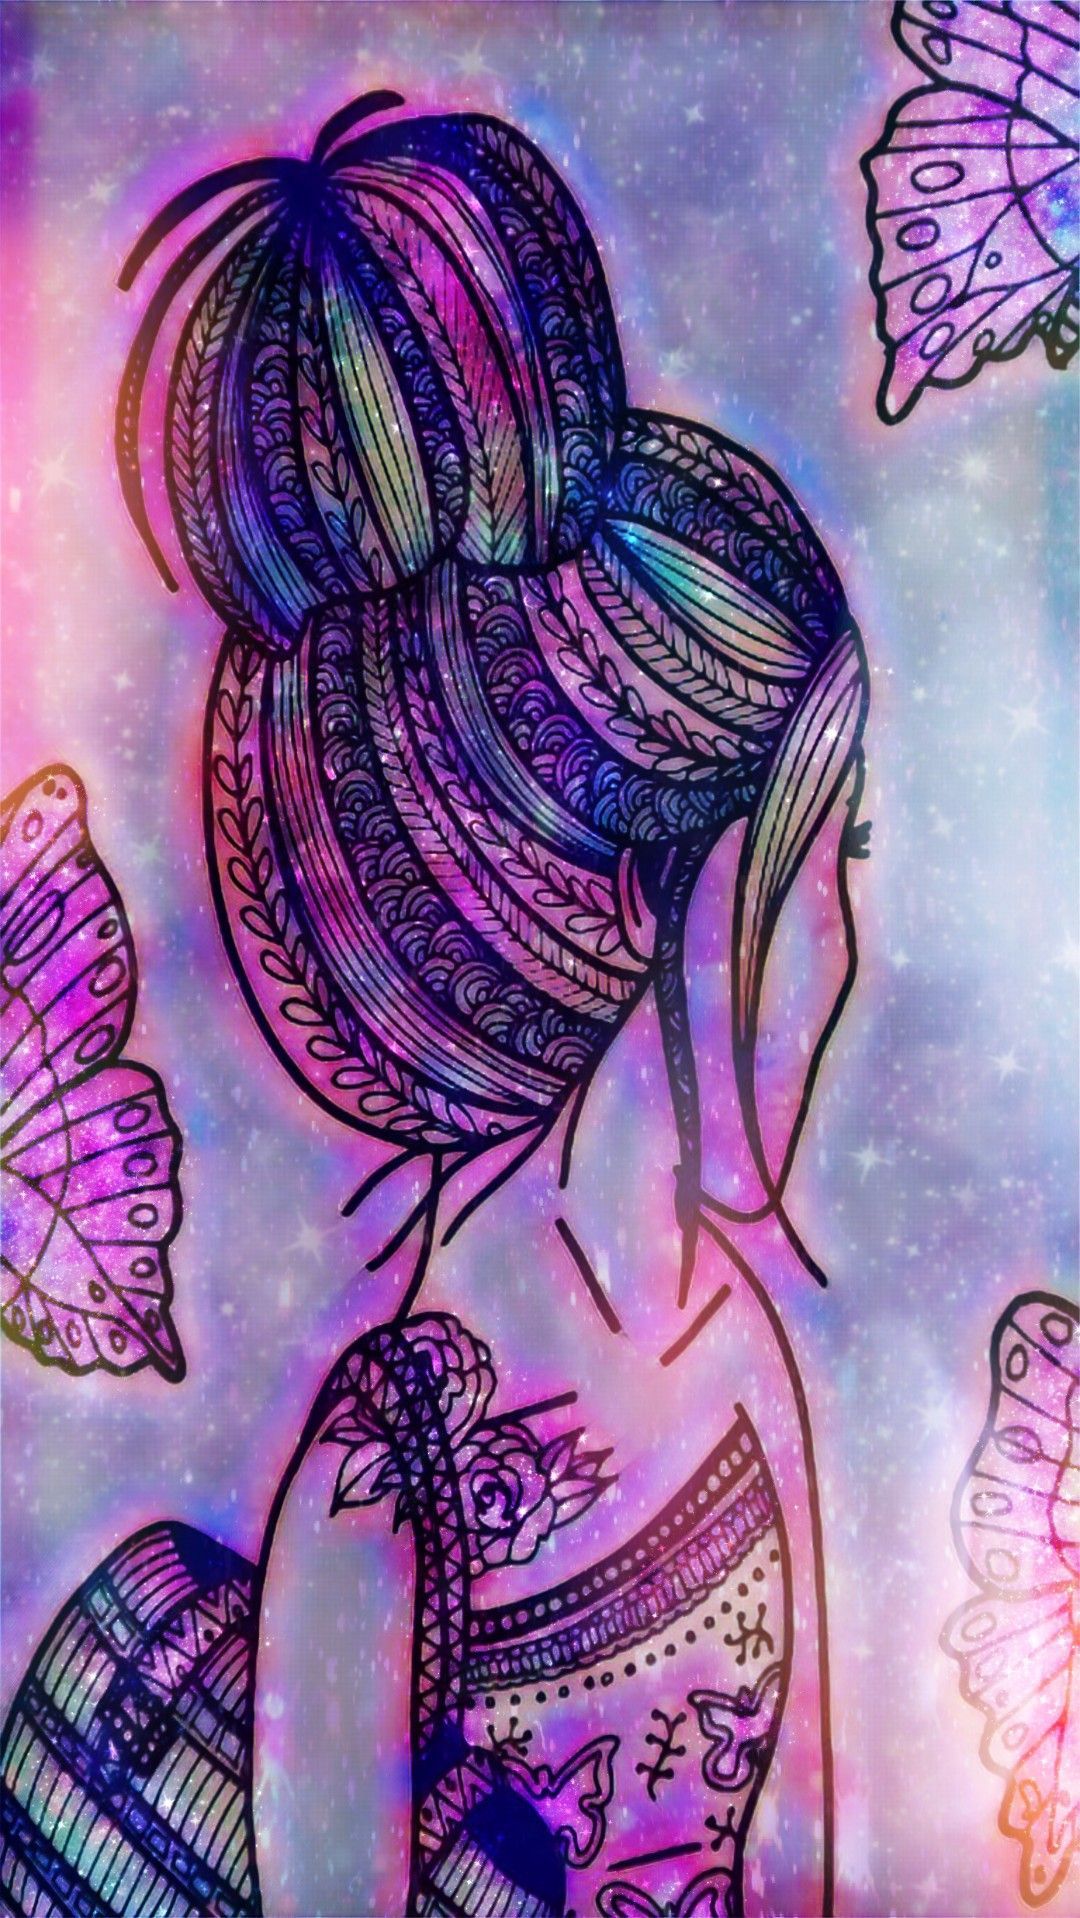 Butterfly Girl Galaxy, made by me #purple #sparkly #wallpaper #background #glitter #colorful #color #girl #galaxy #butterf. Background s, Wallpaper s, Wallpaper